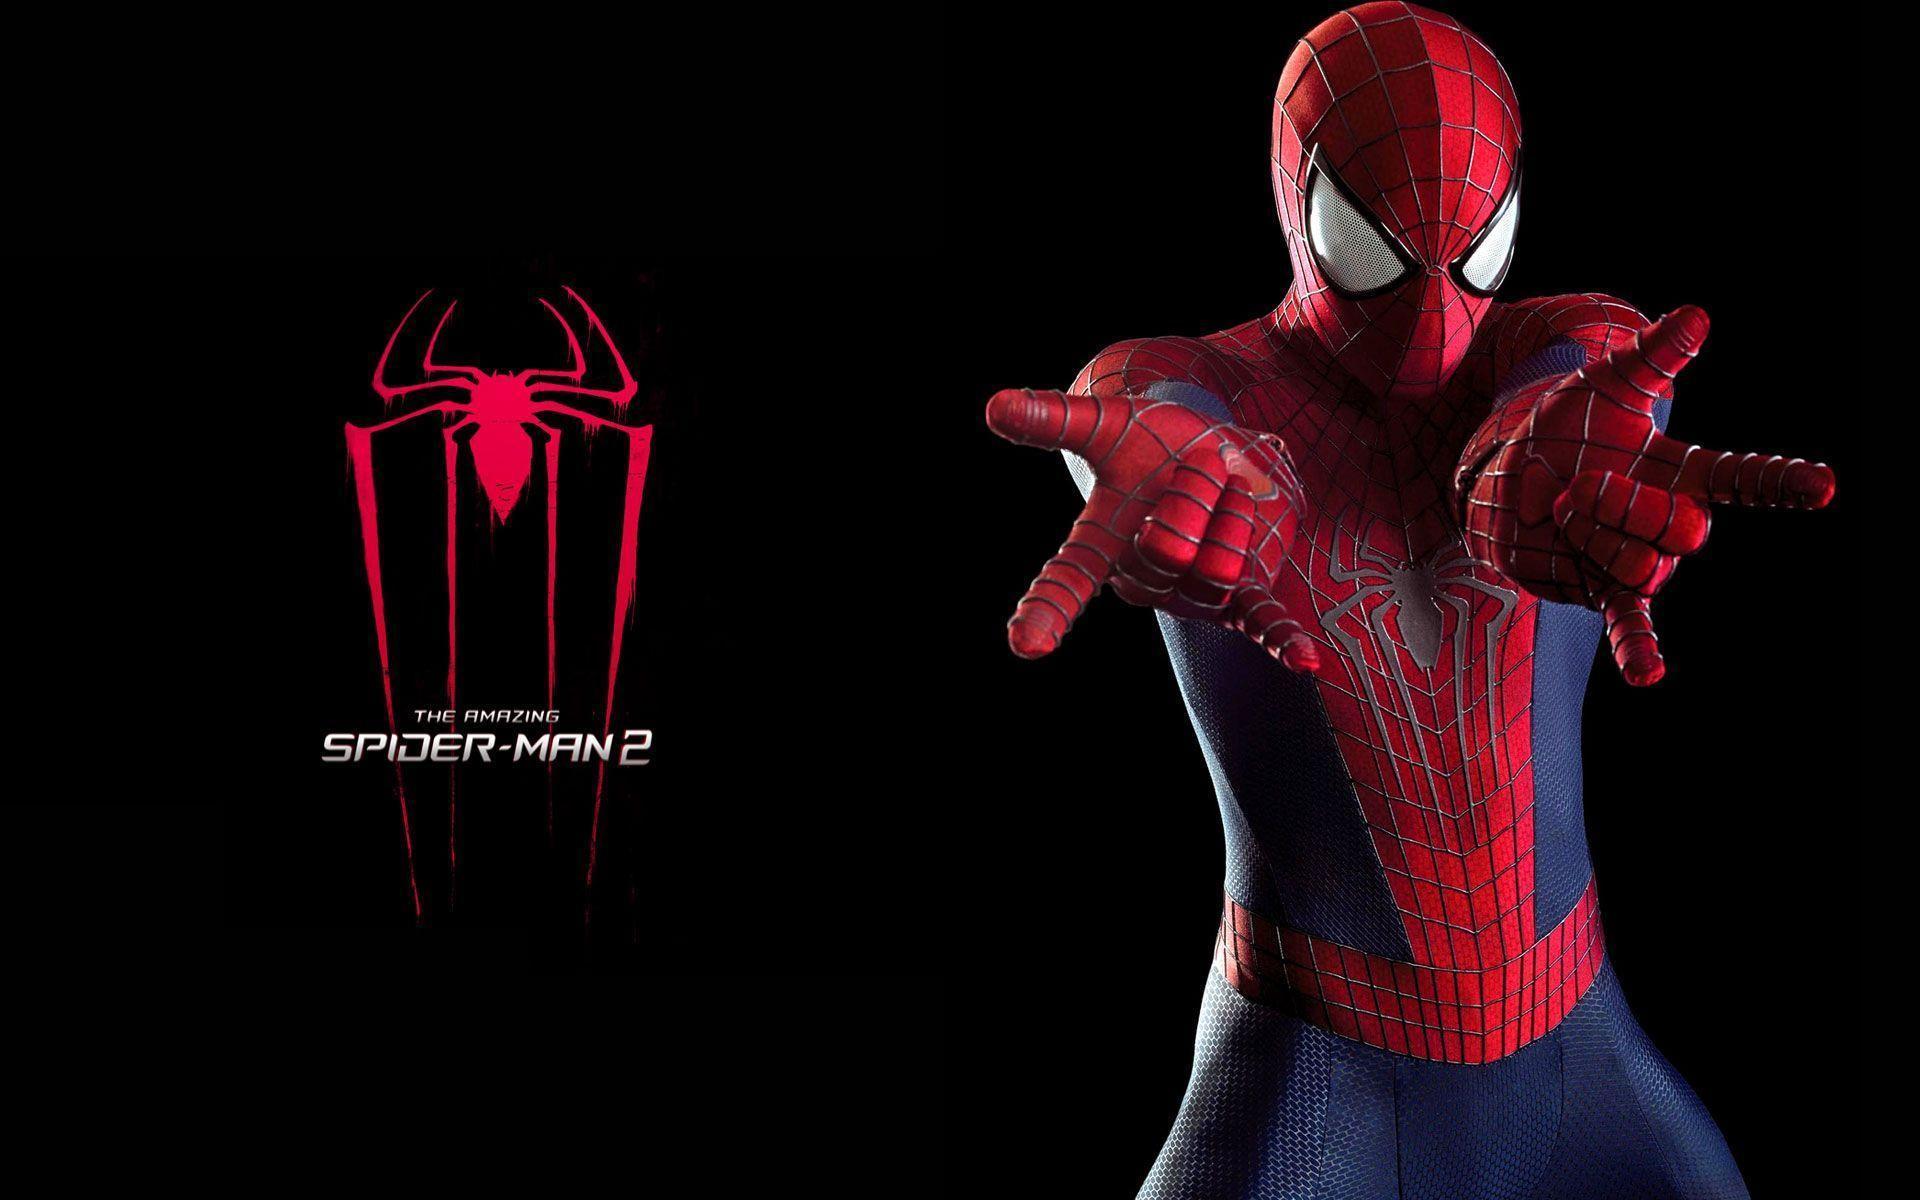 The Amazing Spider Man 2 Wallpaper [HD] & Facebook Cover Photo